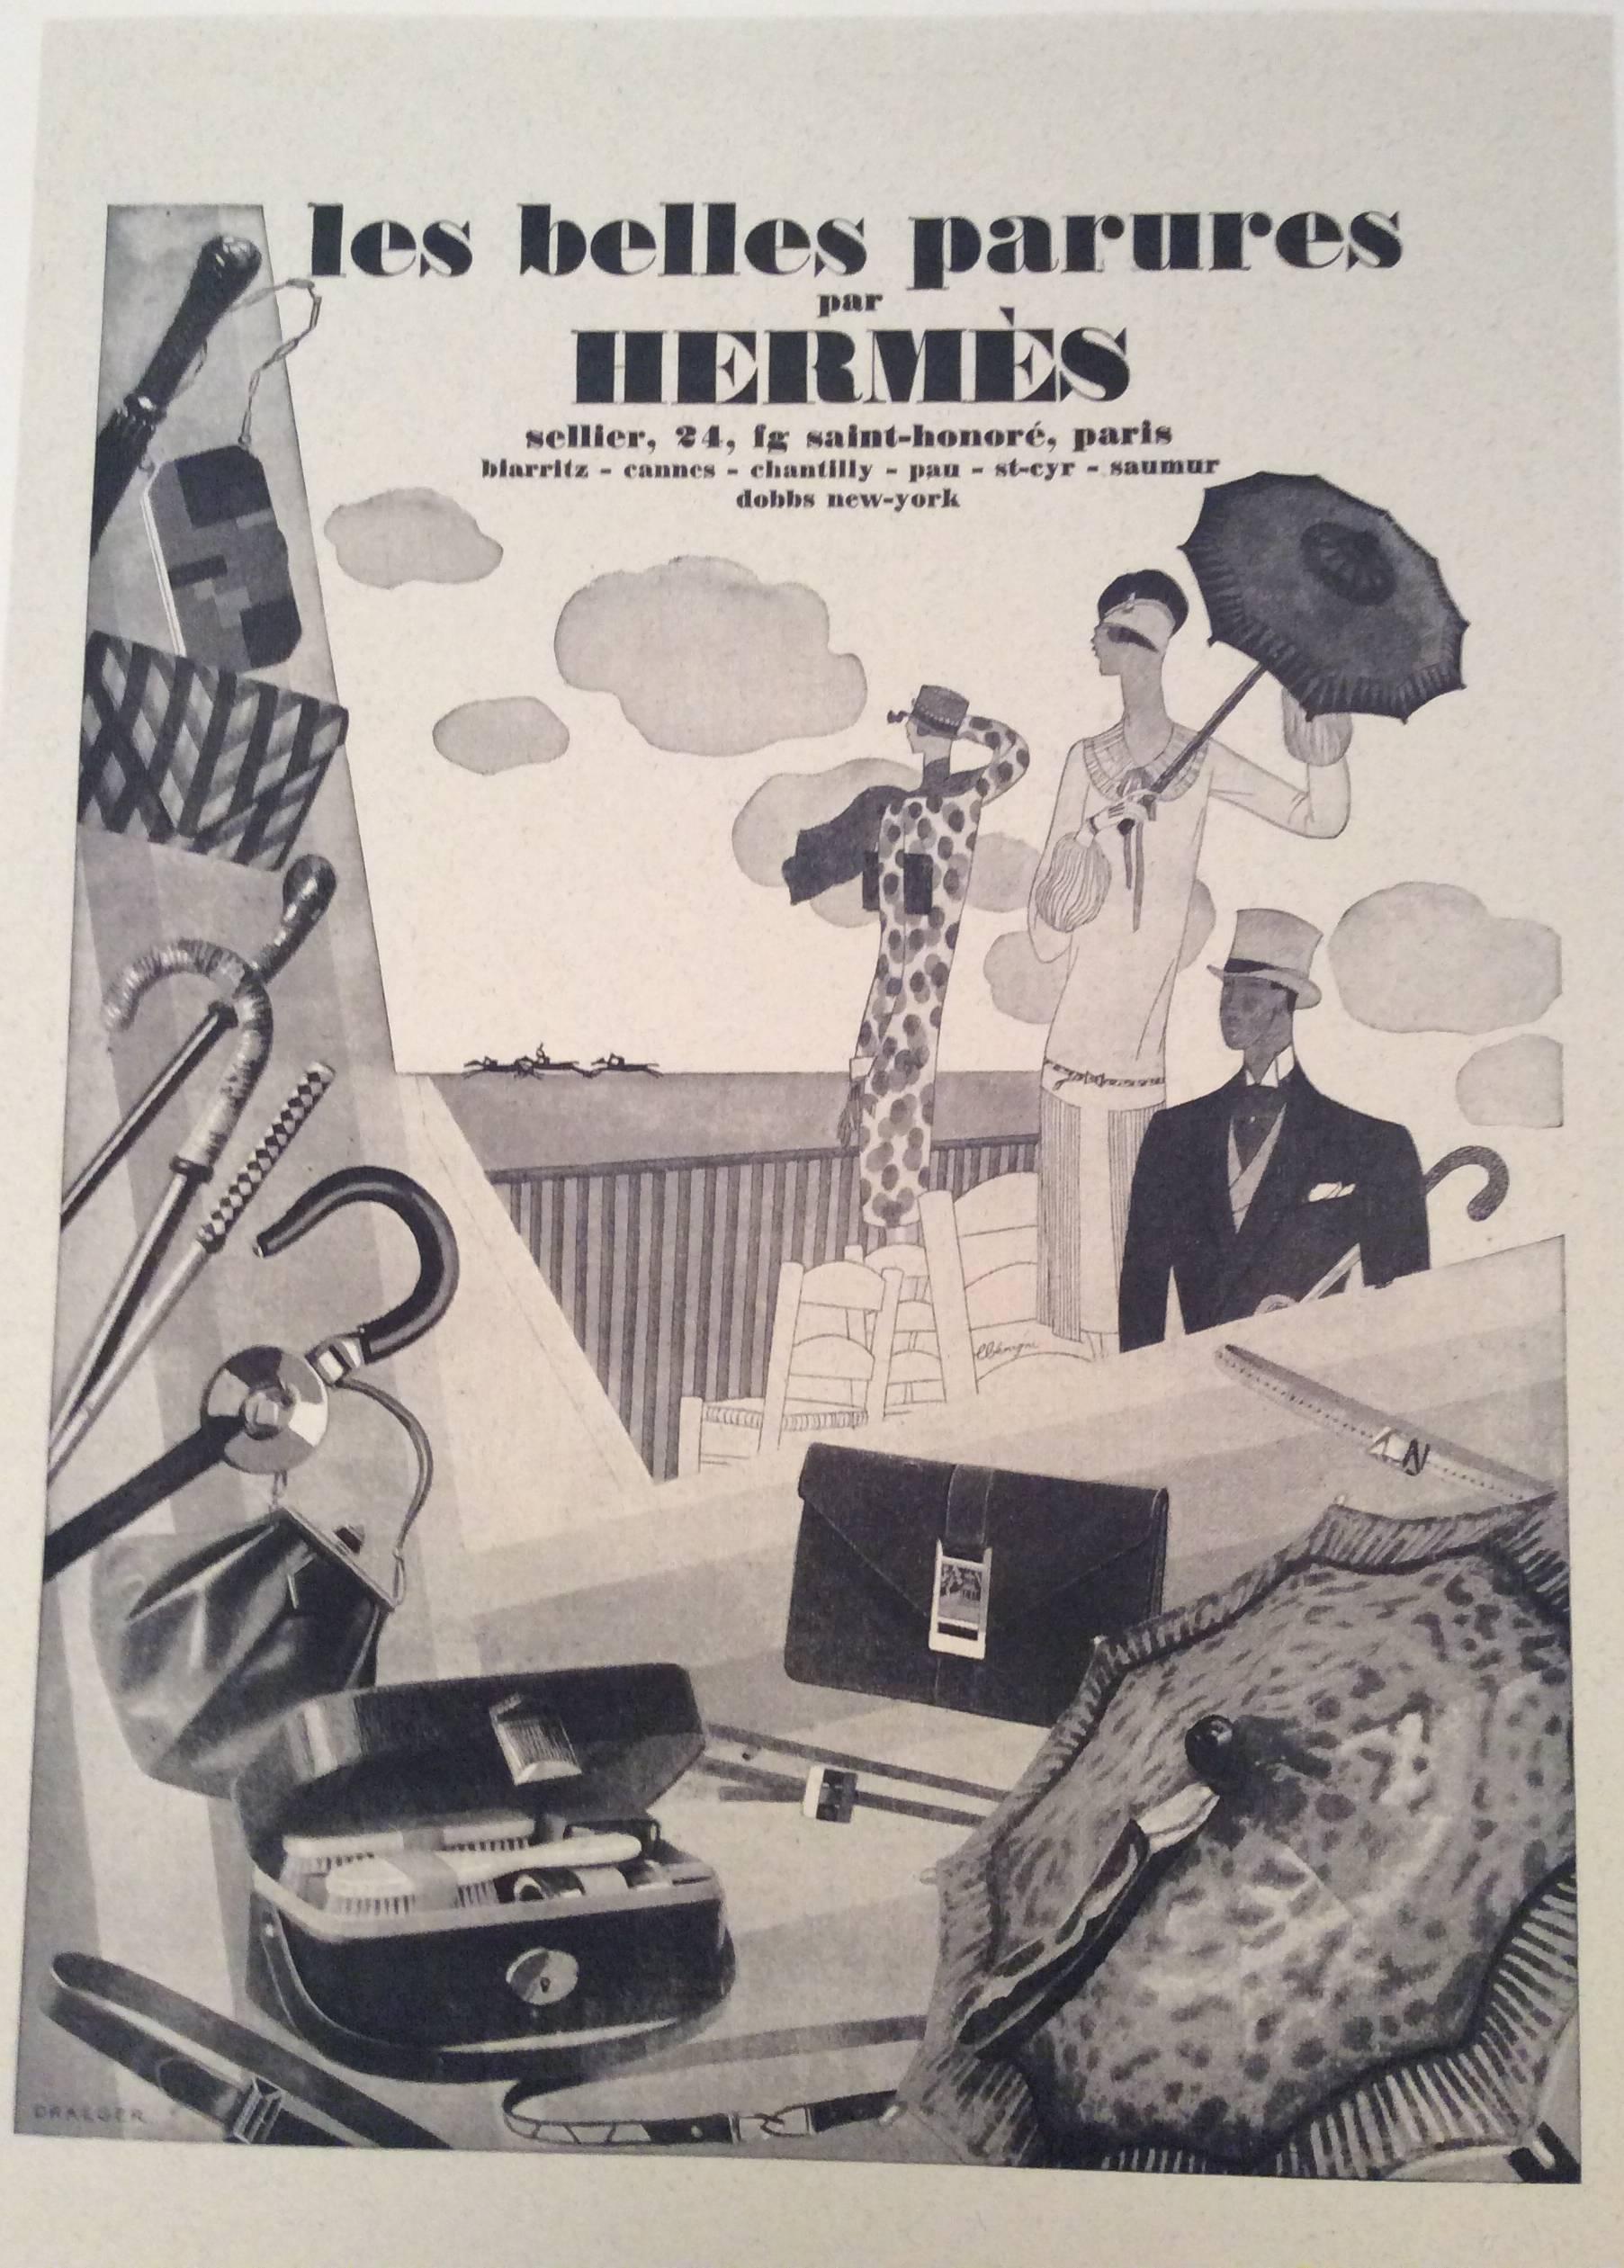 This Hermes ad print is from the 1930's collection of Hermes advertisements. The image features spectators onlooking towards a horse race happening in the background. There is a selection of vintage Hermes products adorning the exterior border of